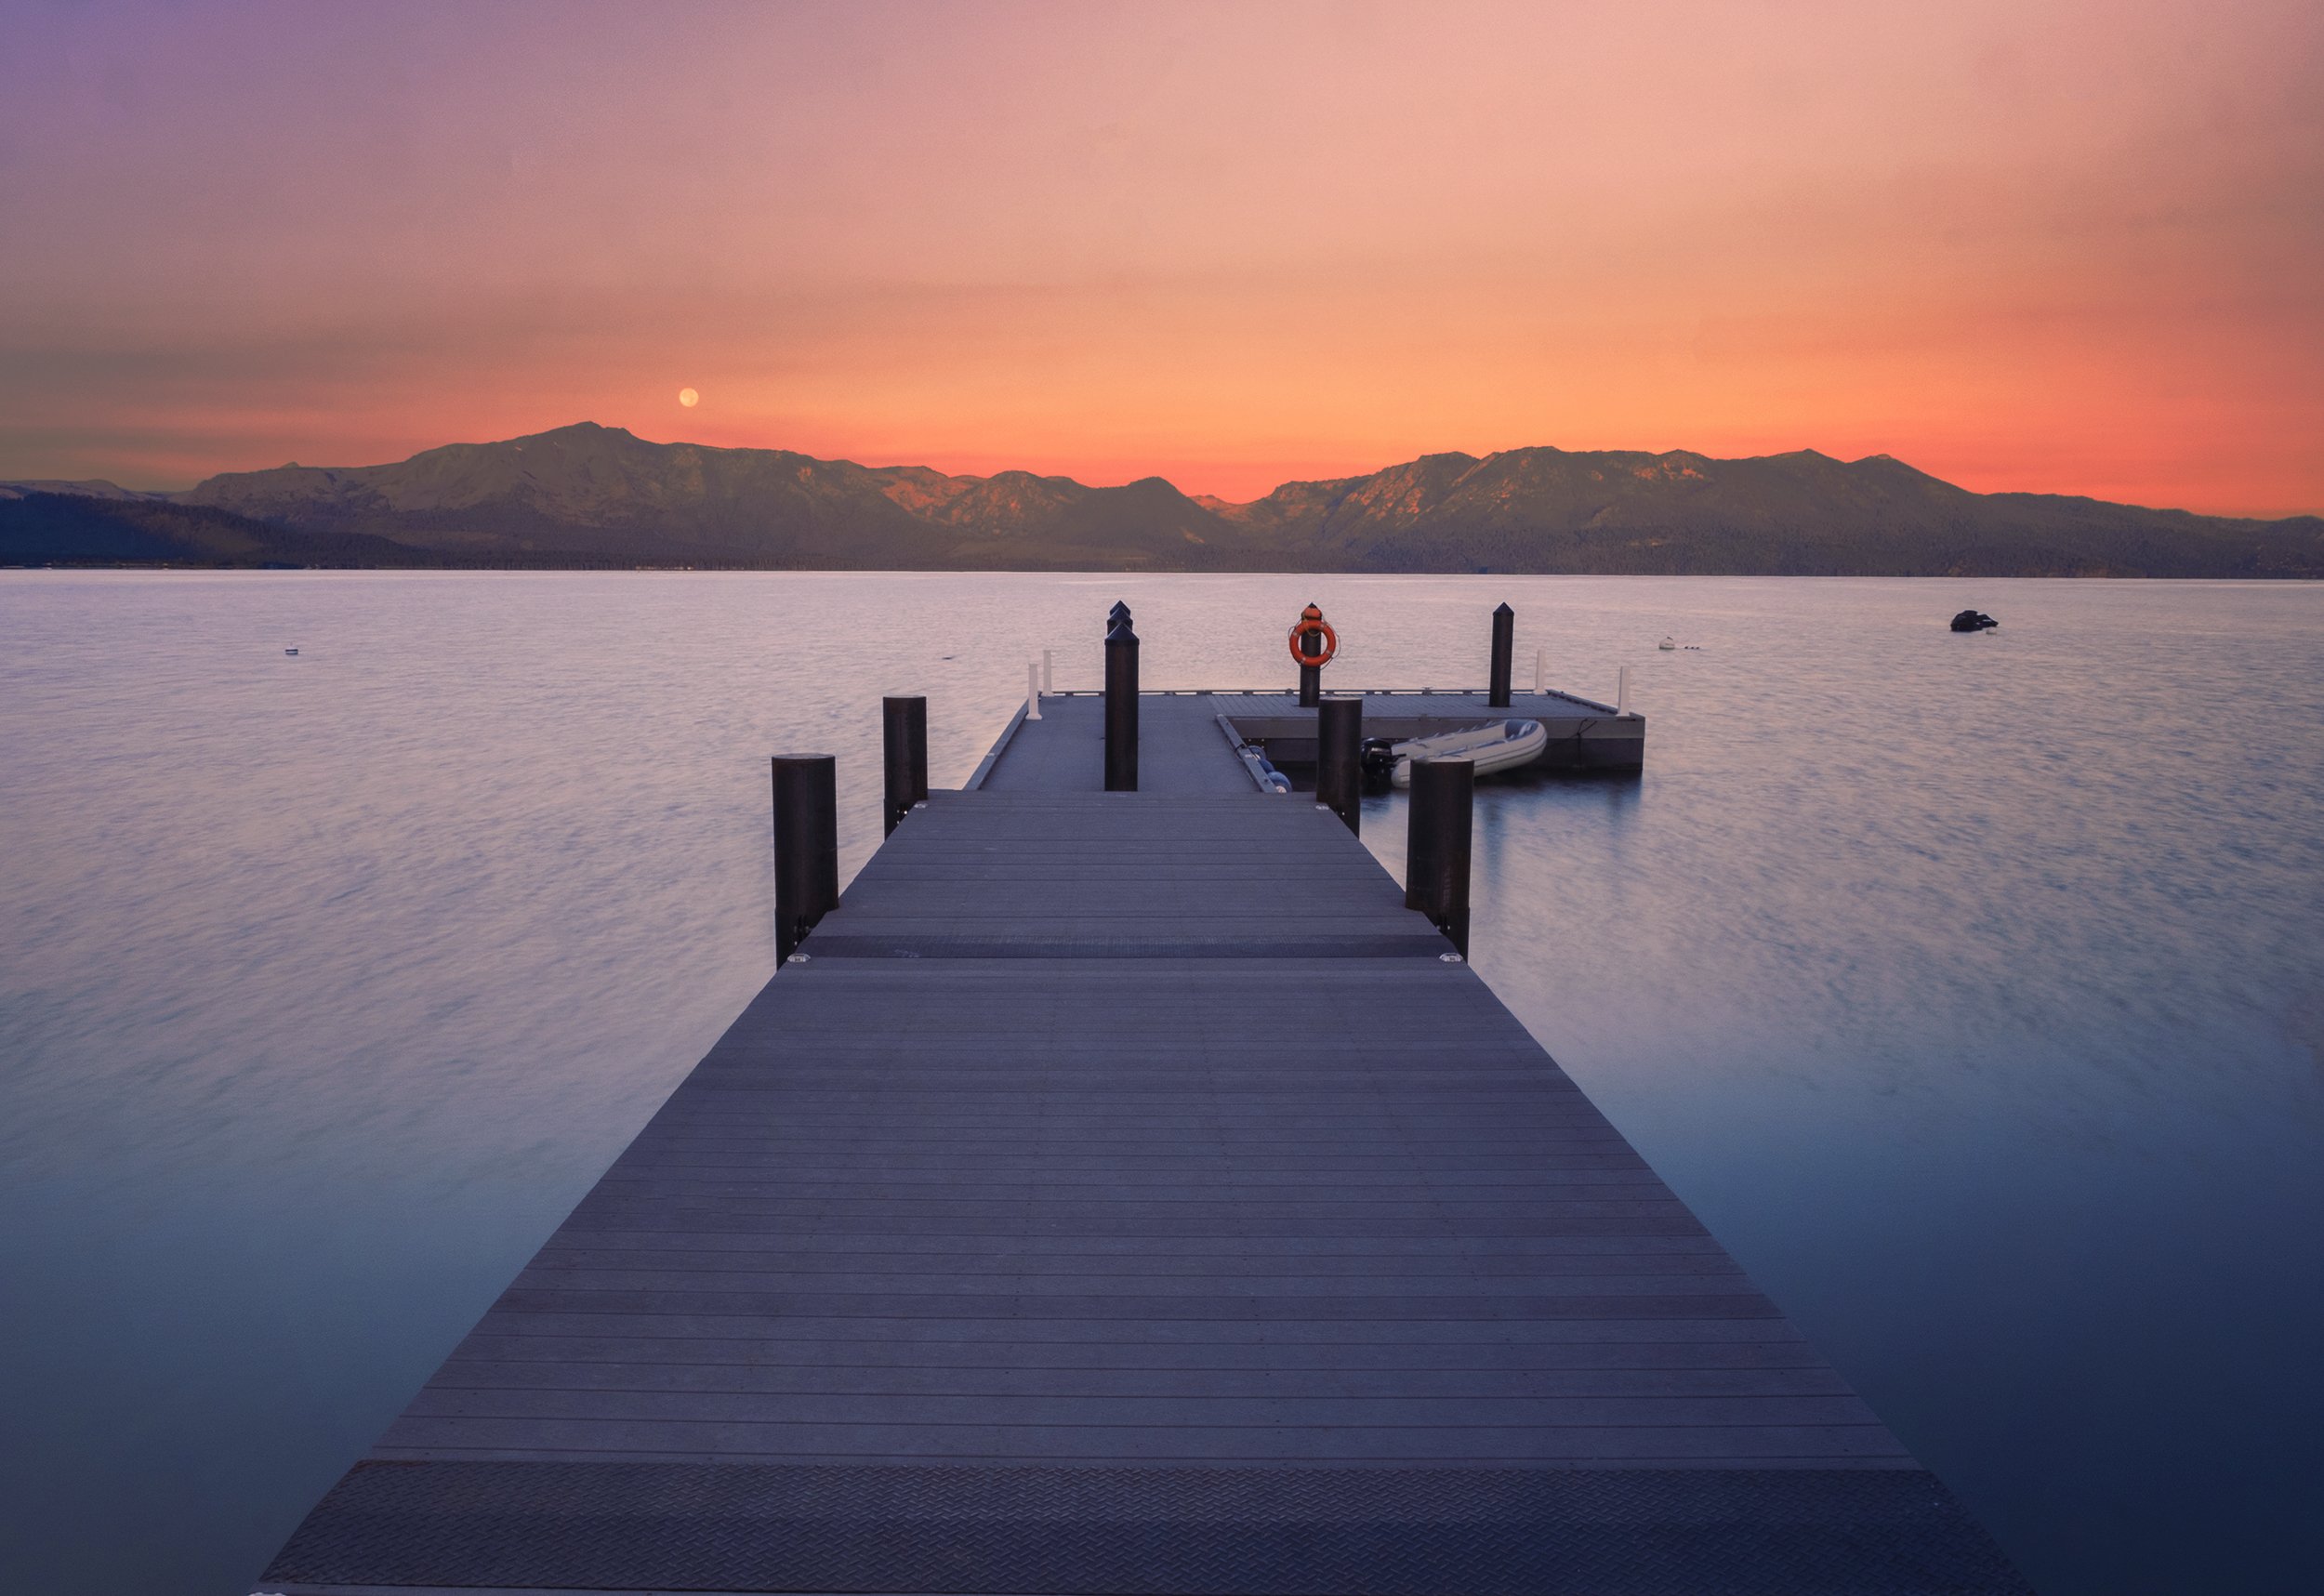 Sunset over Tahoe Beach Club's private dock, surrounded by the warm hues of the sky, offering a peaceful and scenic view of the tranquil waters of Lake Tahoe. (Copy) (Copy) (Copy)